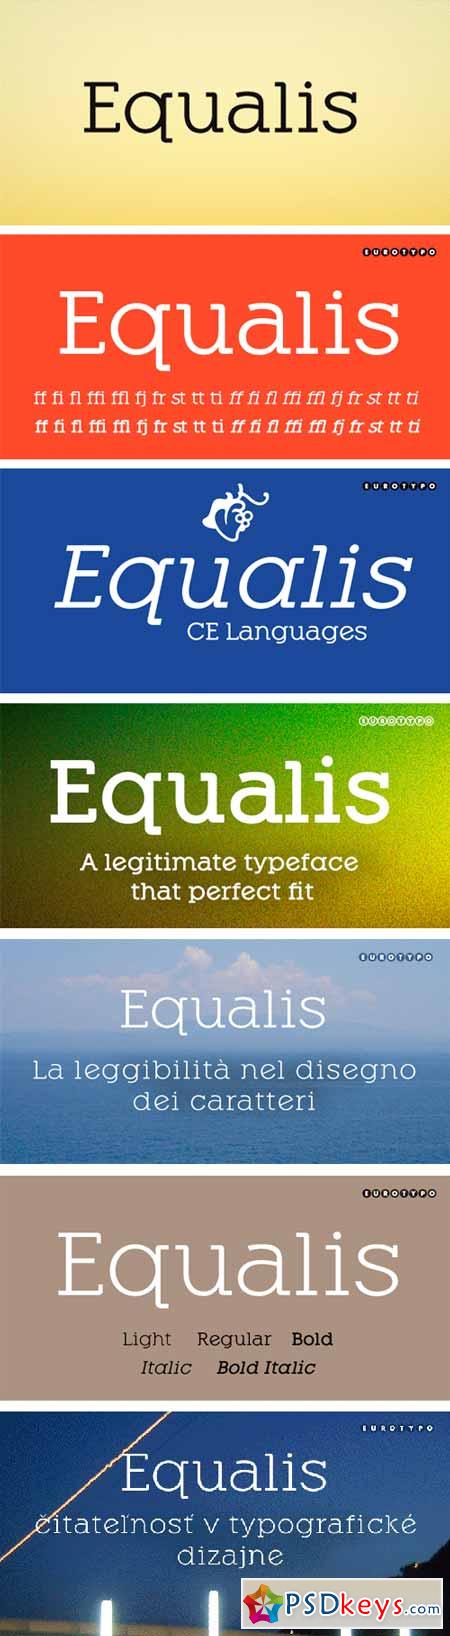 Equalis Font Family